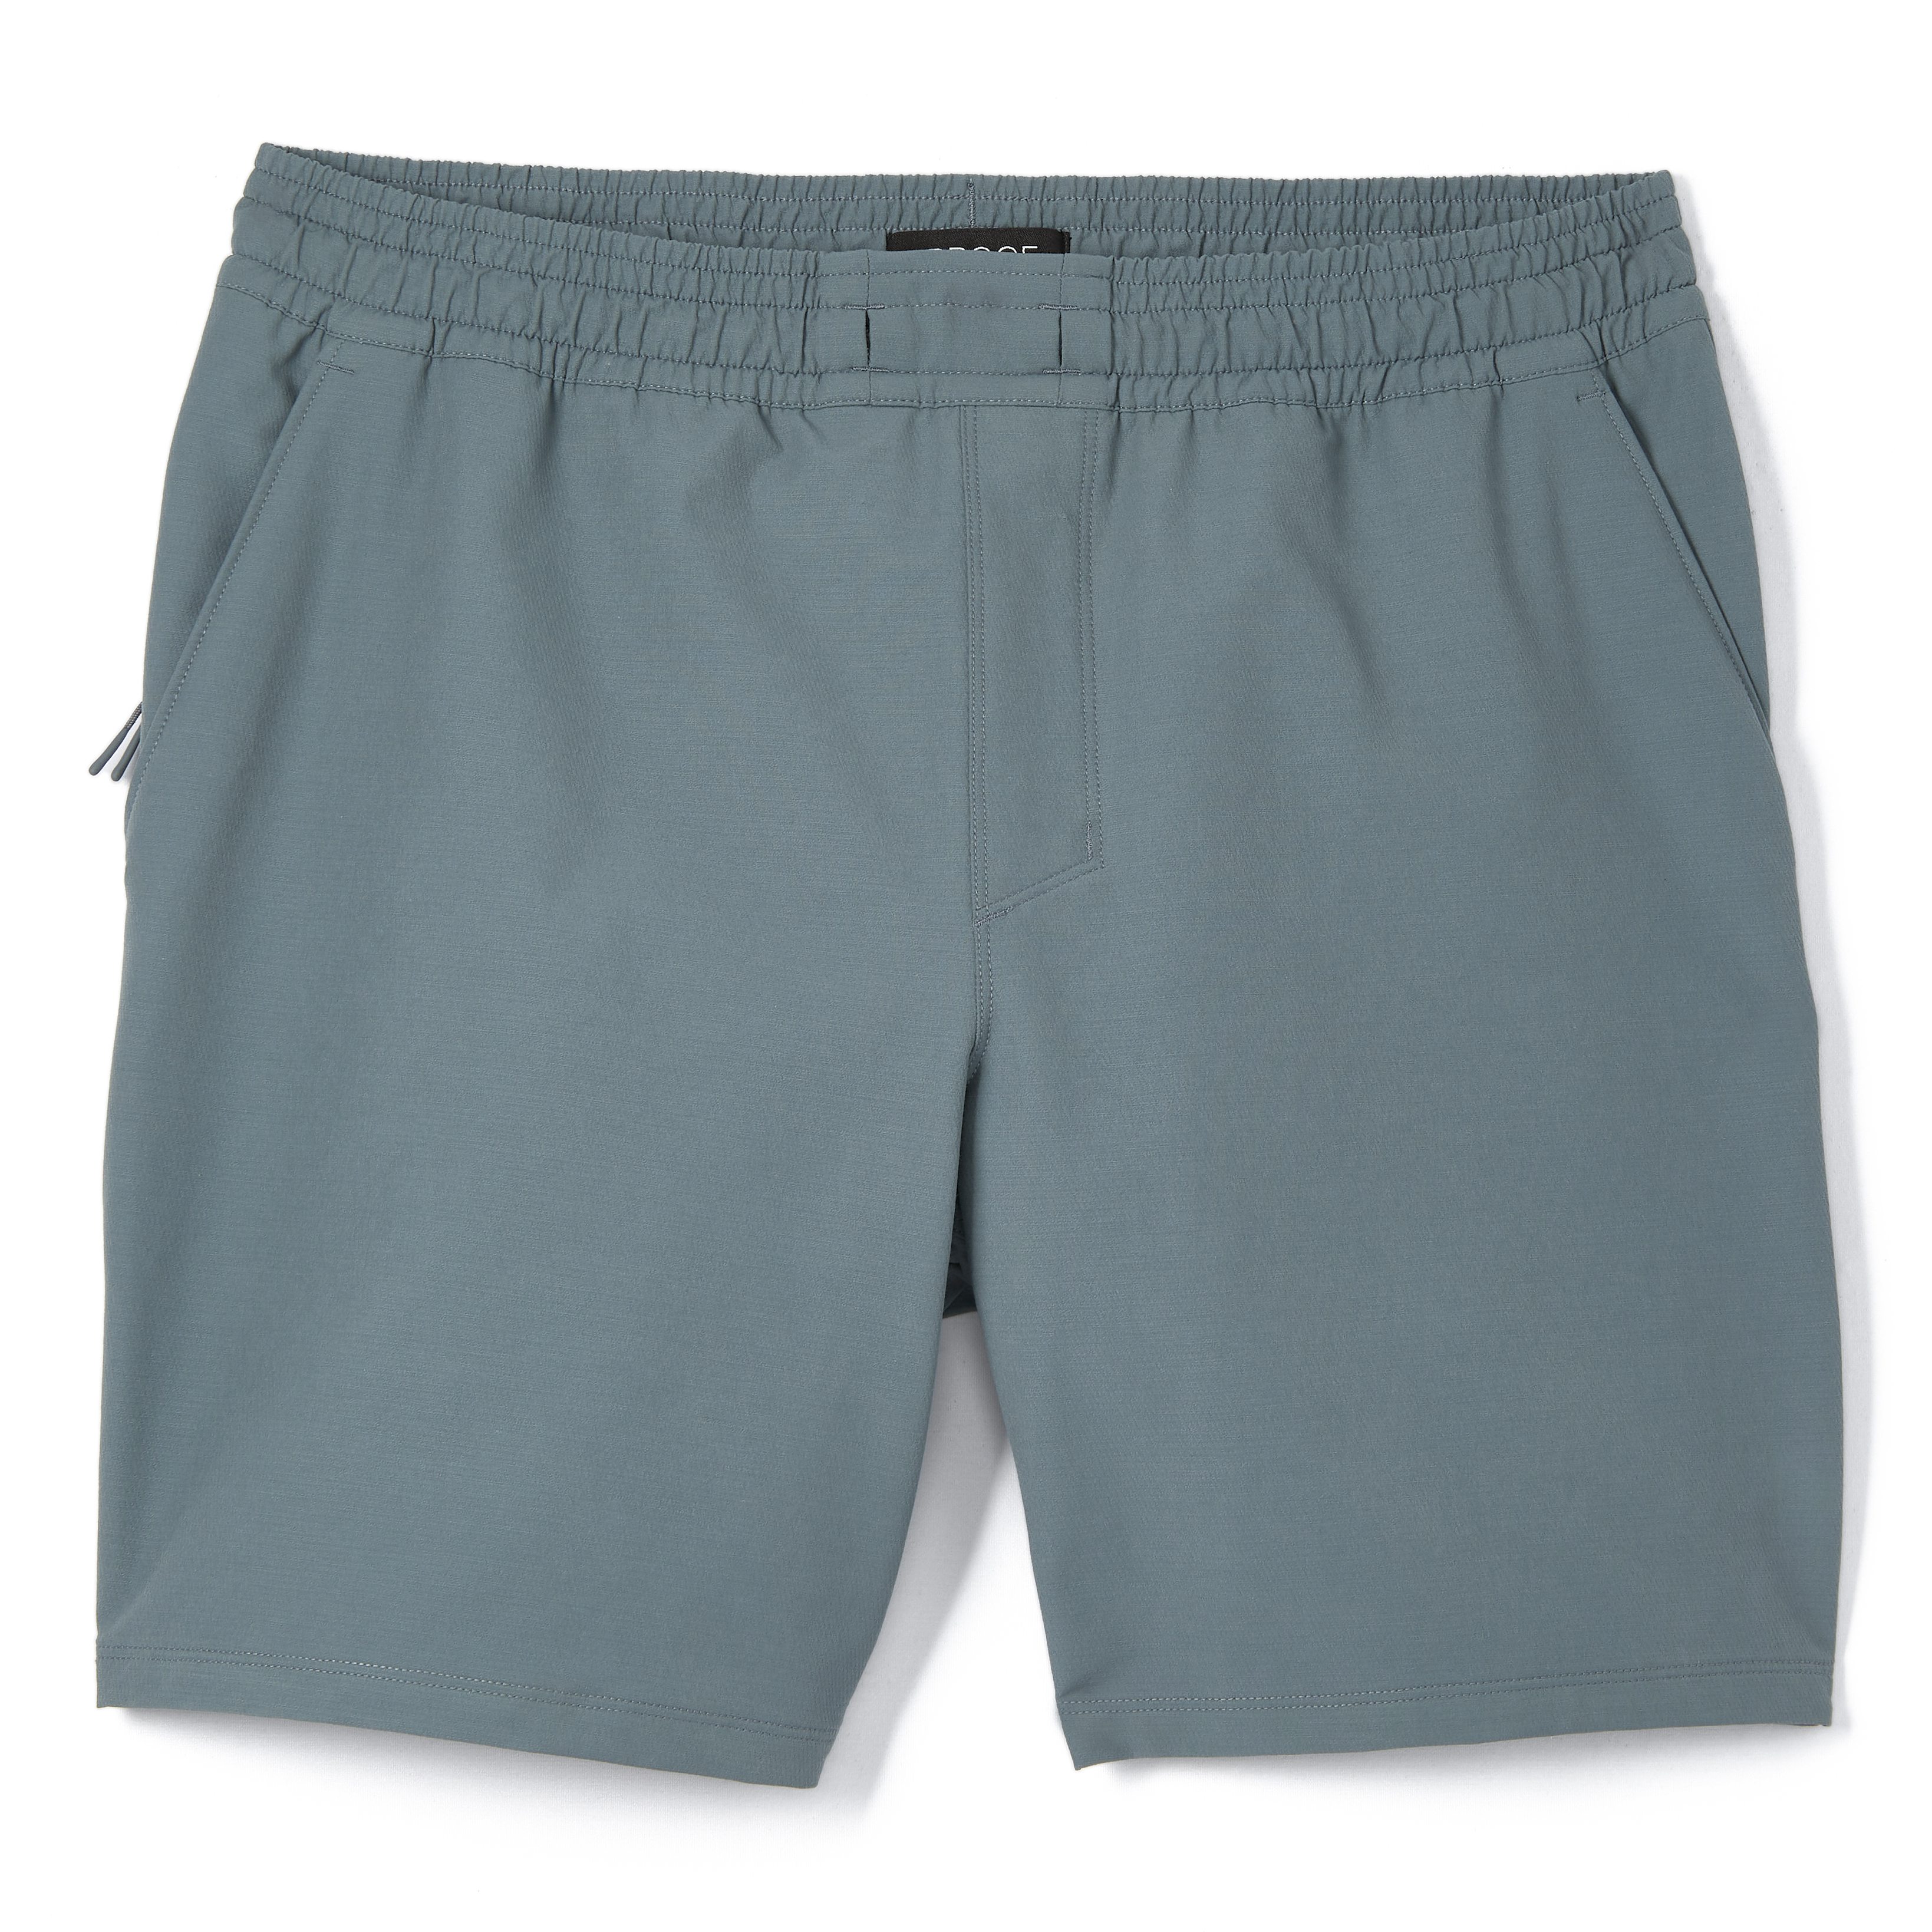 Proof Trail Active Short - 7